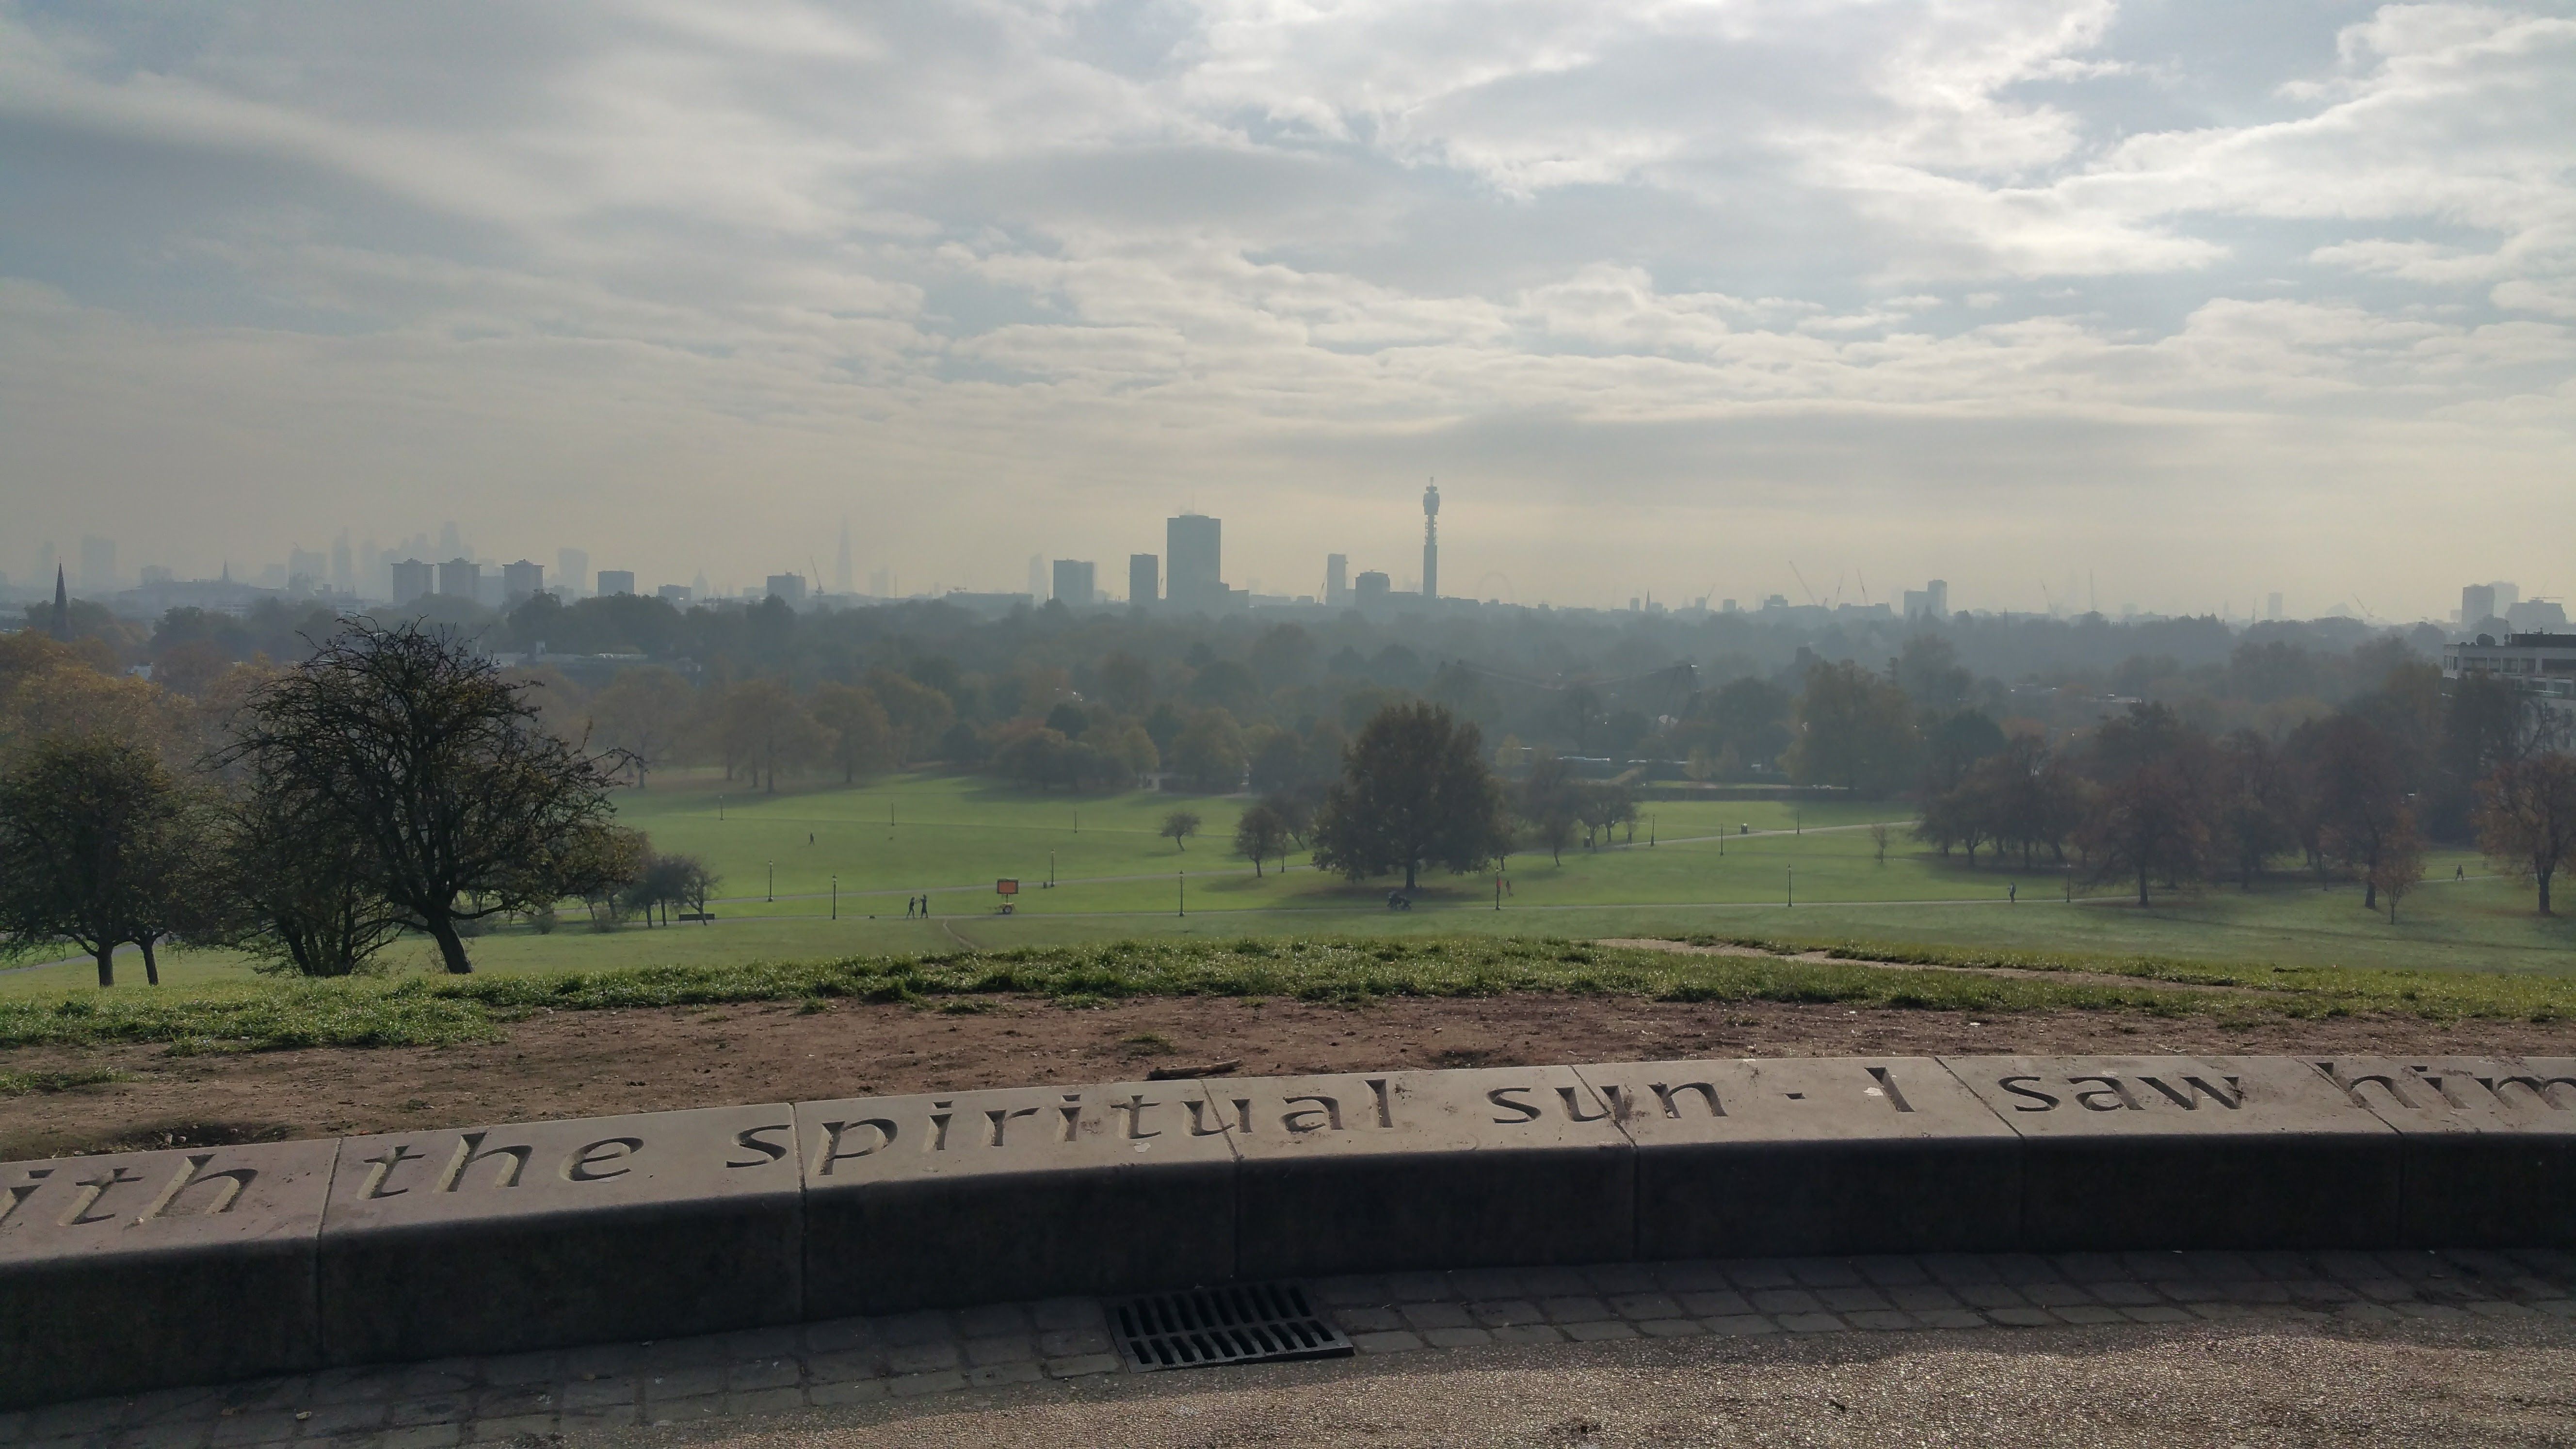 View from the top of the hill of Regent's park, London